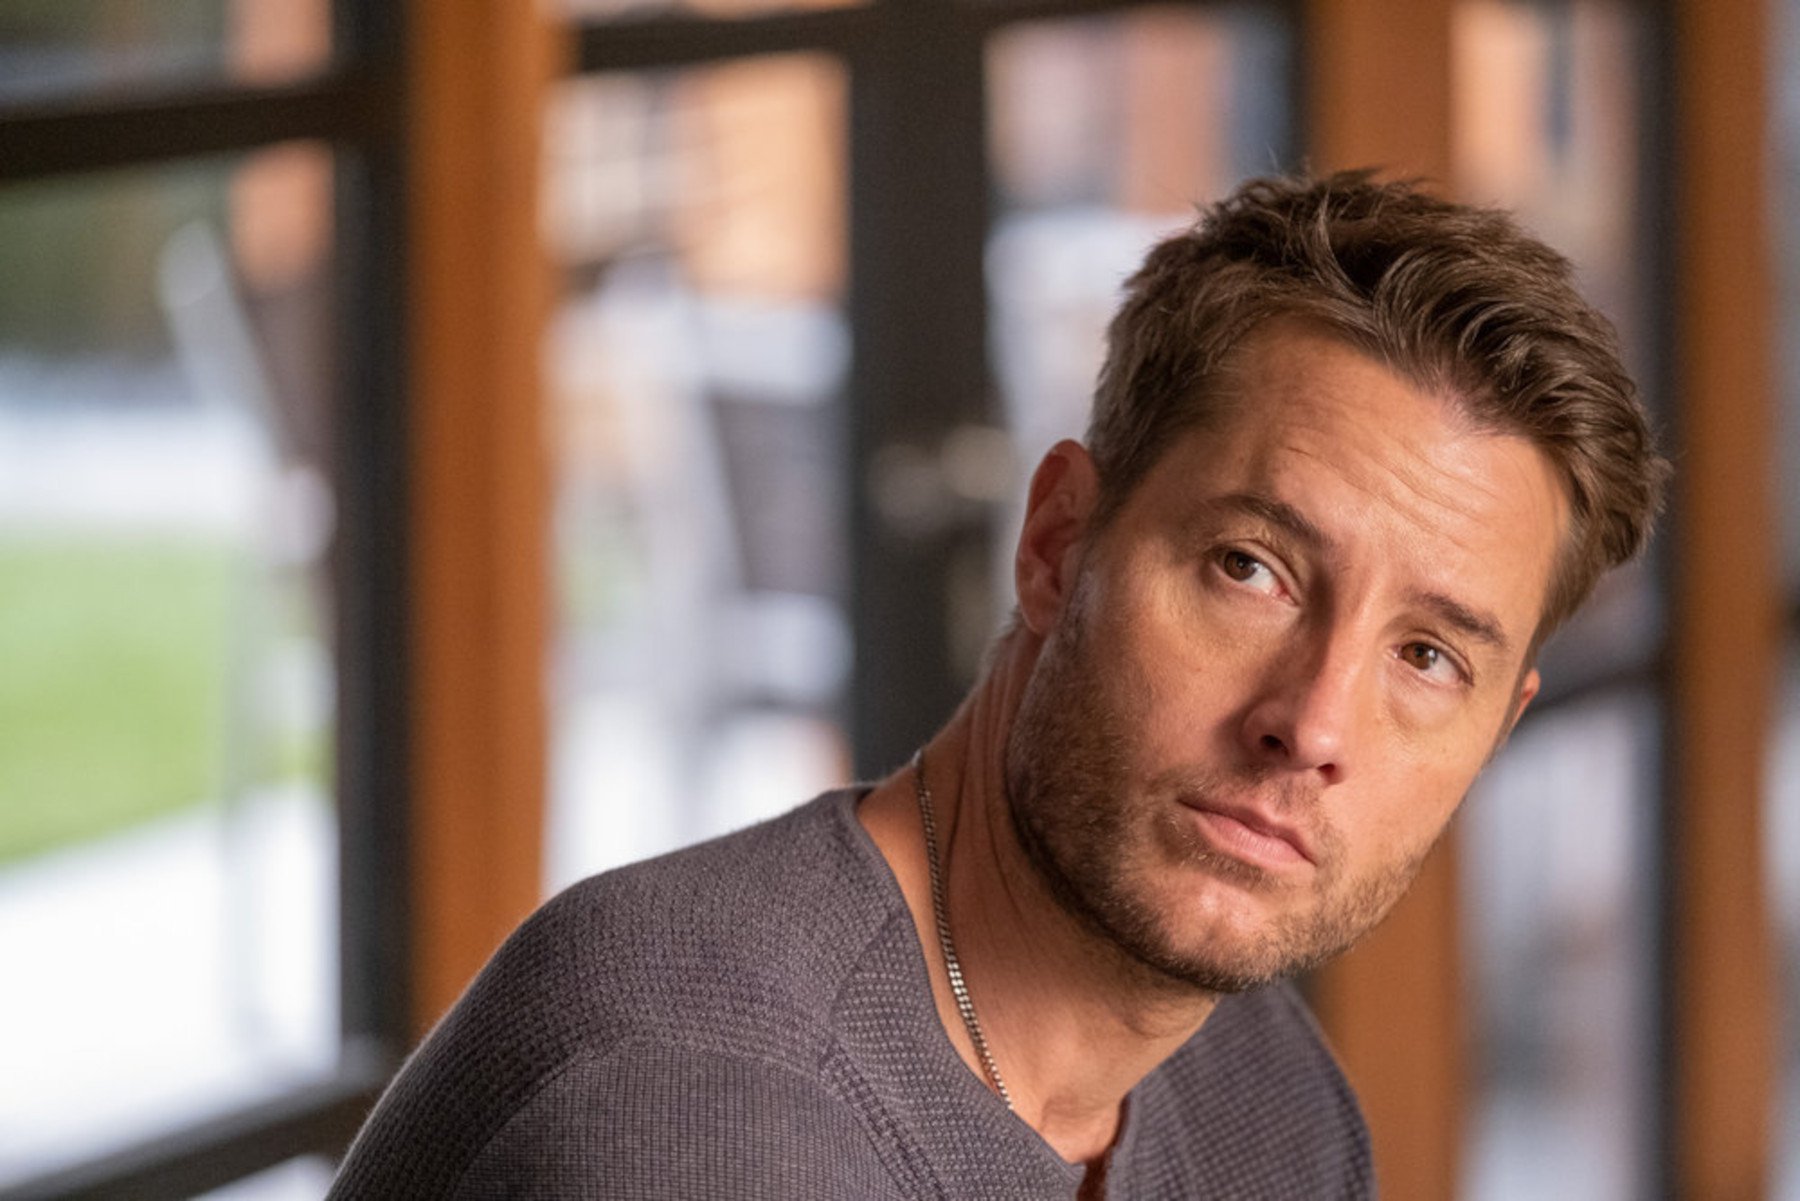 Justin Hartley as Kevin Pearson in 'This Is Us' Season 6 Episode 16. He's wearing a gray T-shirt and frowning.